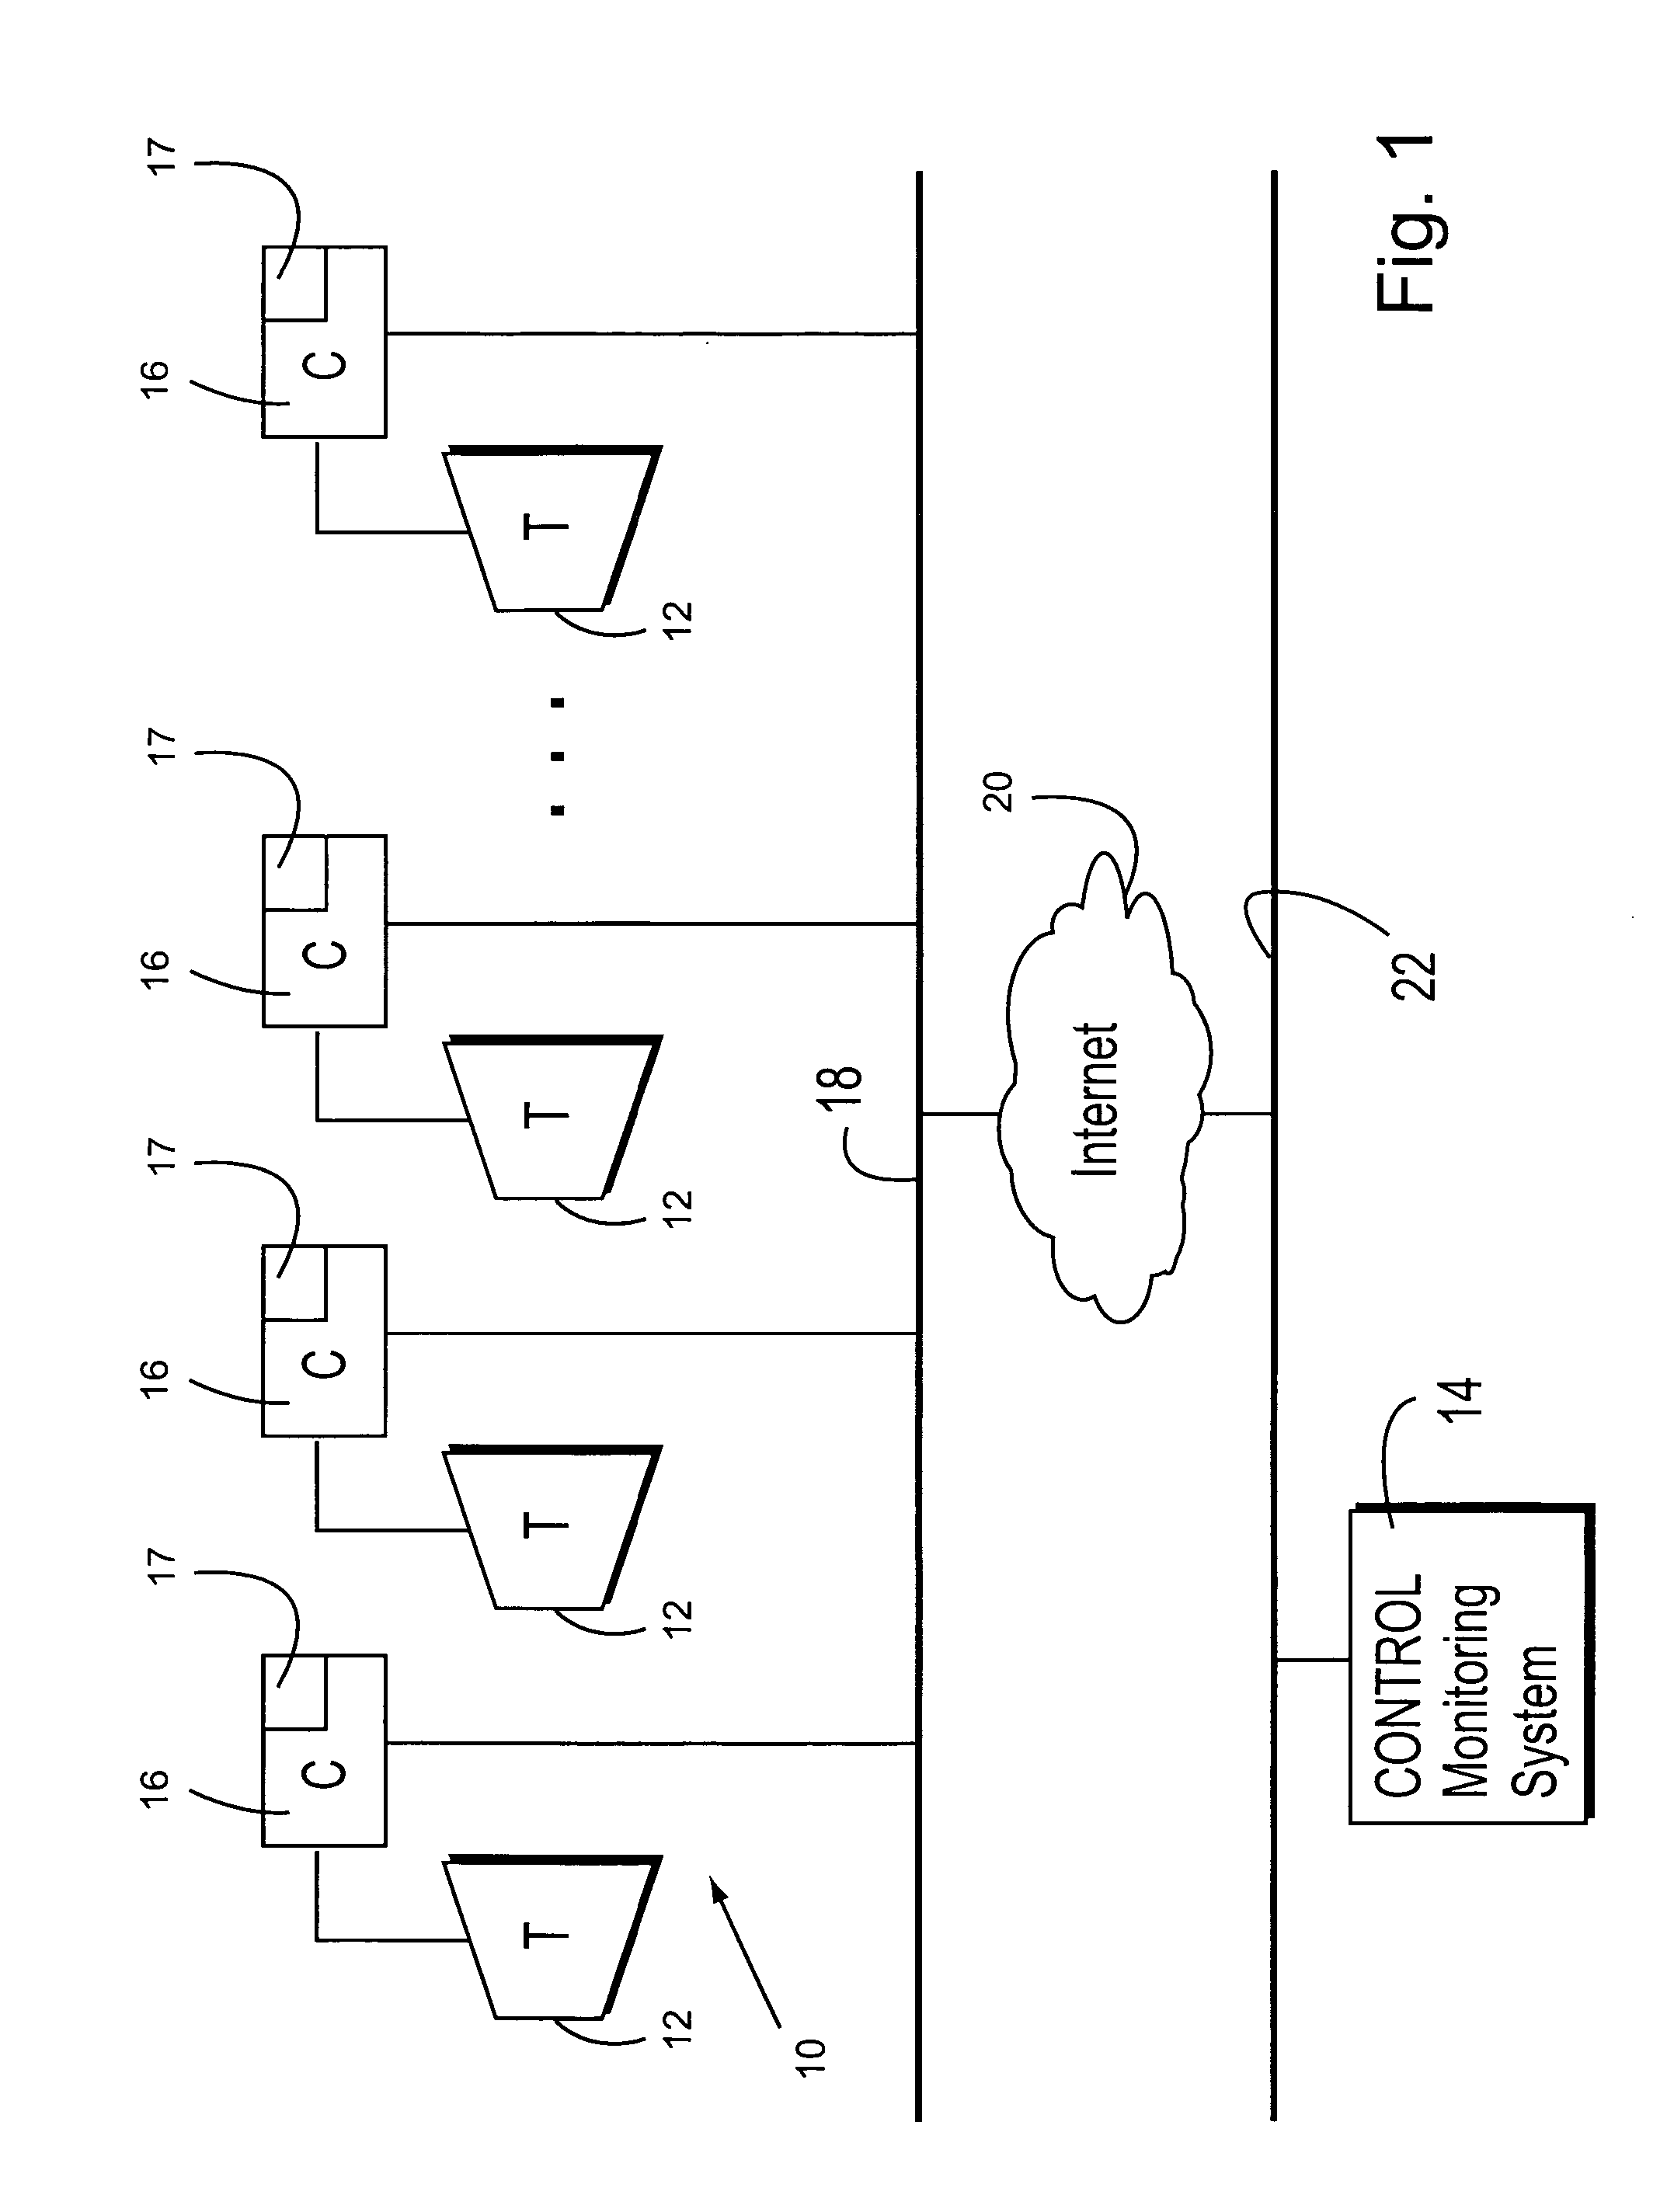 System and method for updating turbine controls and monitoring revision history of turbine fleet